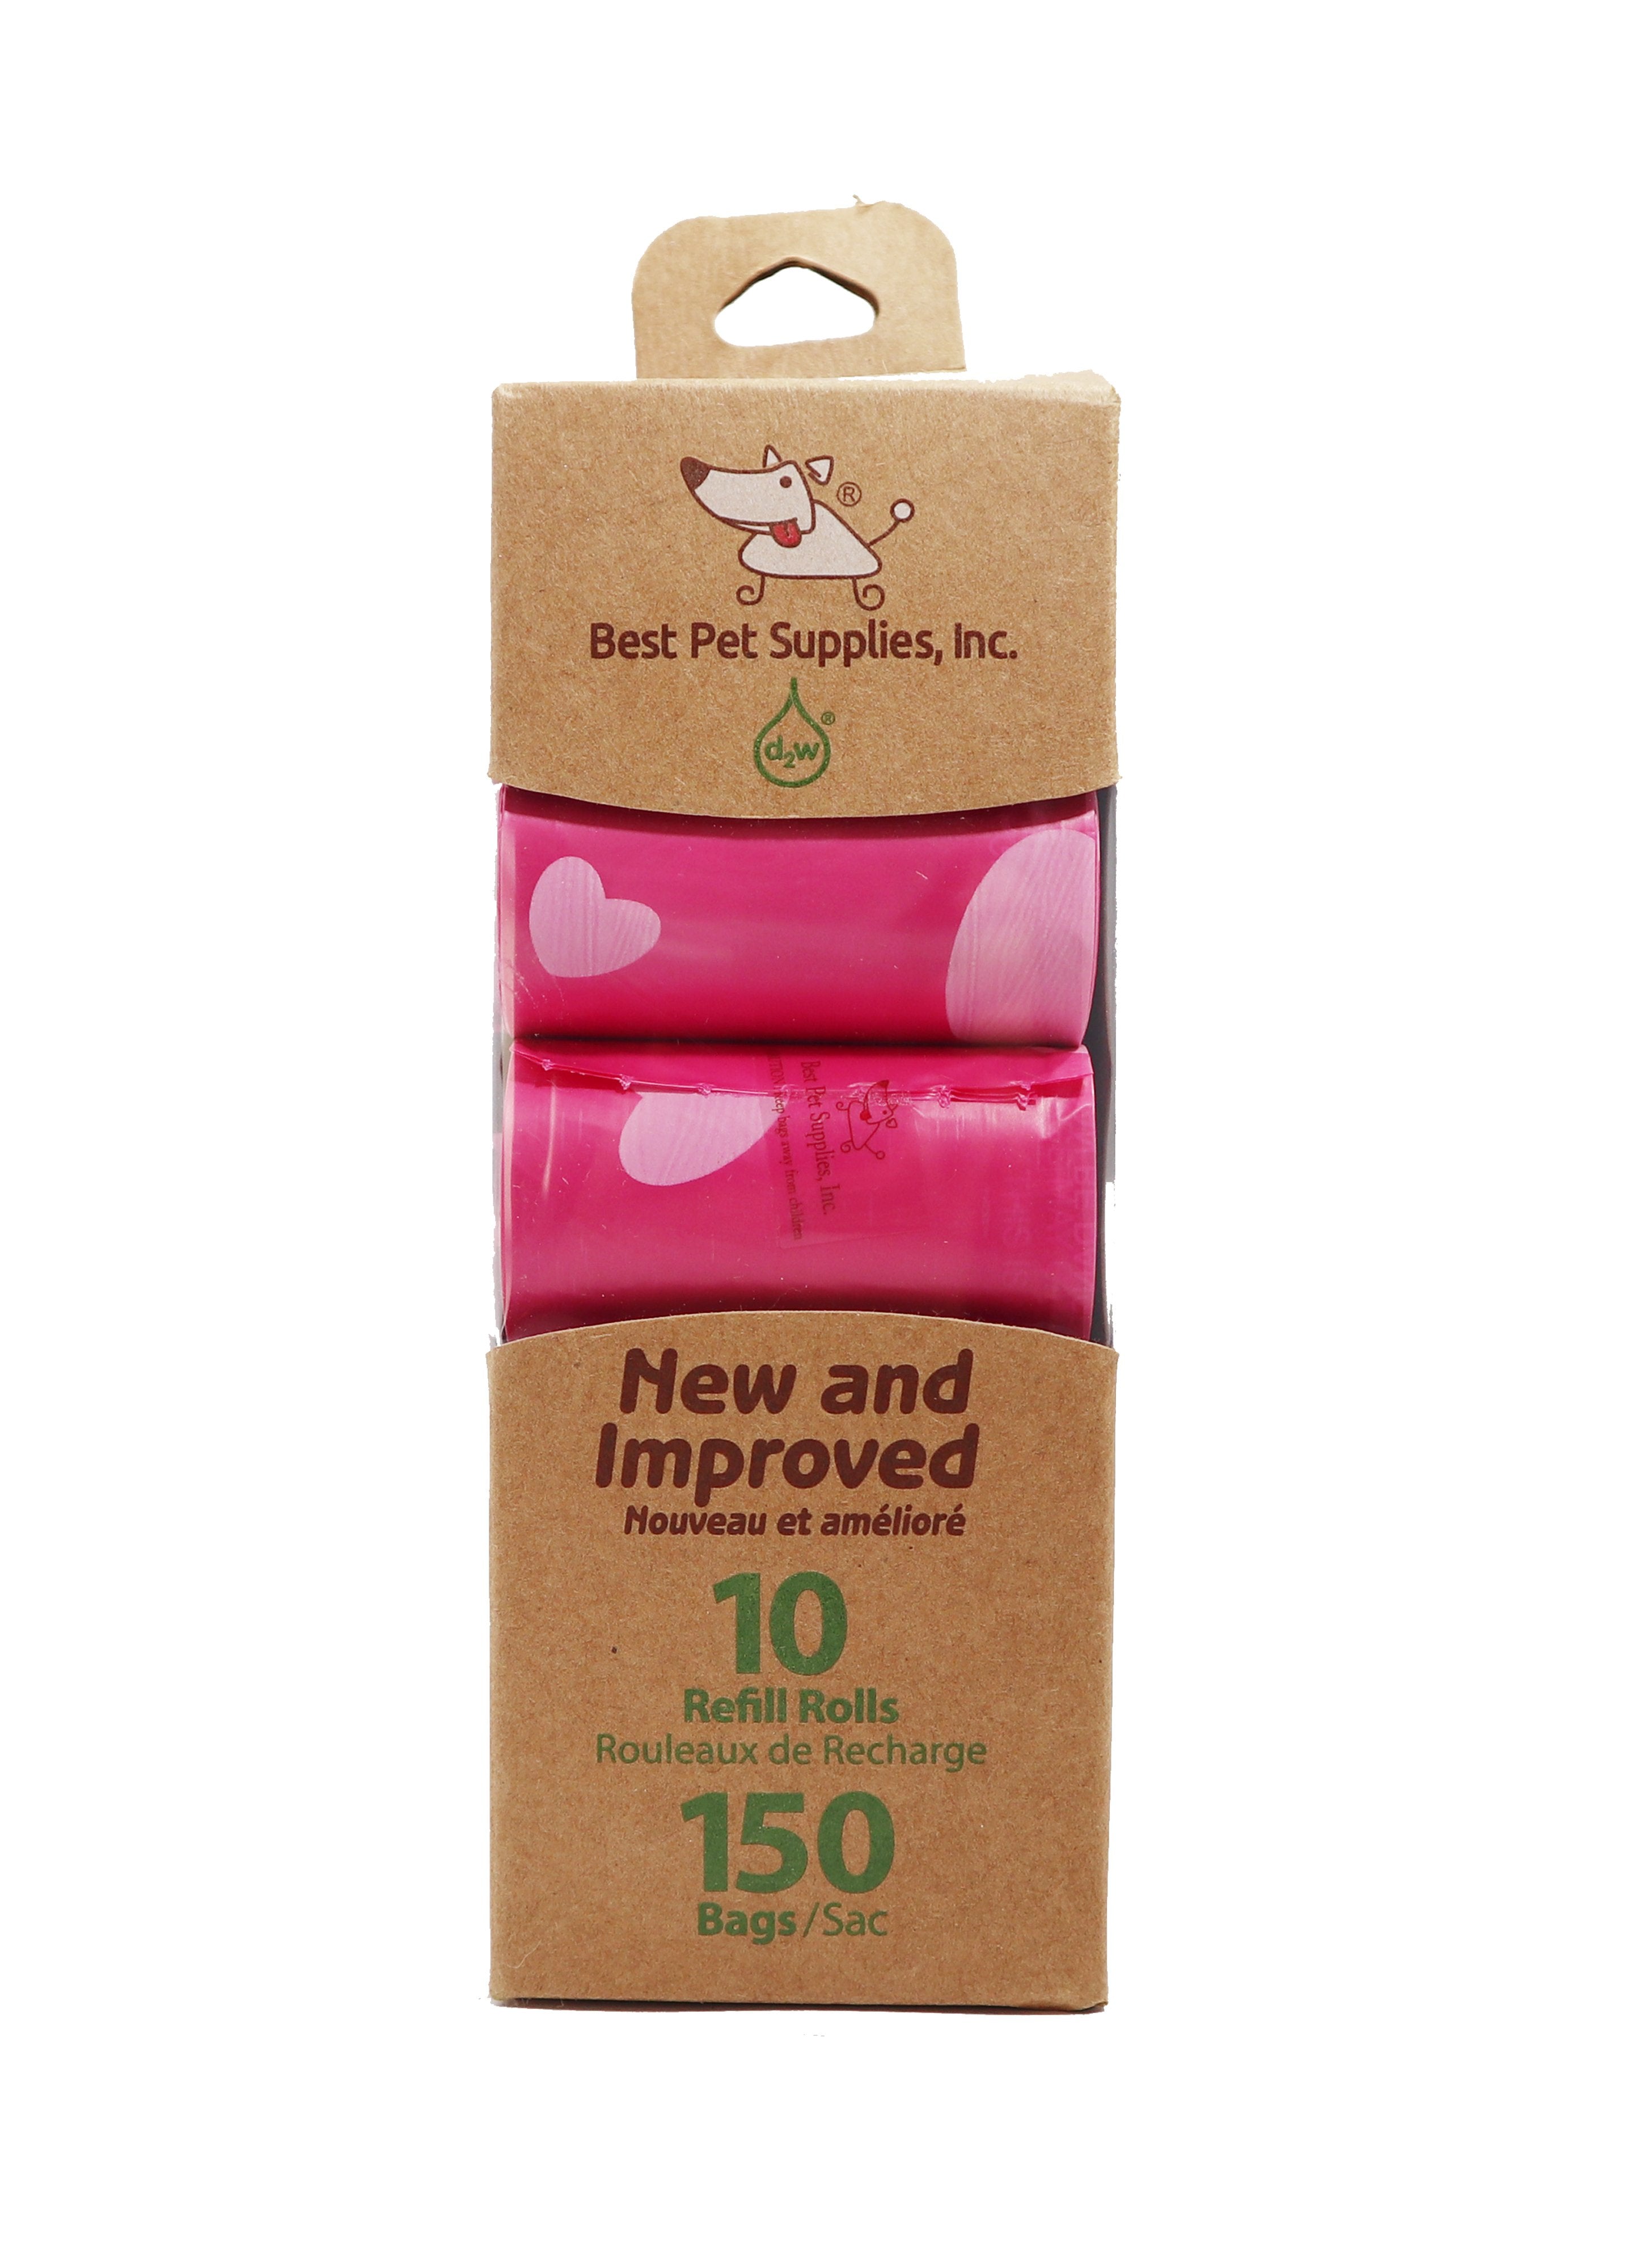 Best Pet Supplies 150 Waste Bags 10 Refill Rolls  New and Improved Fresh Scented, Fits all standard dispensers. Pink Bags with Big Hearts Pattern. 